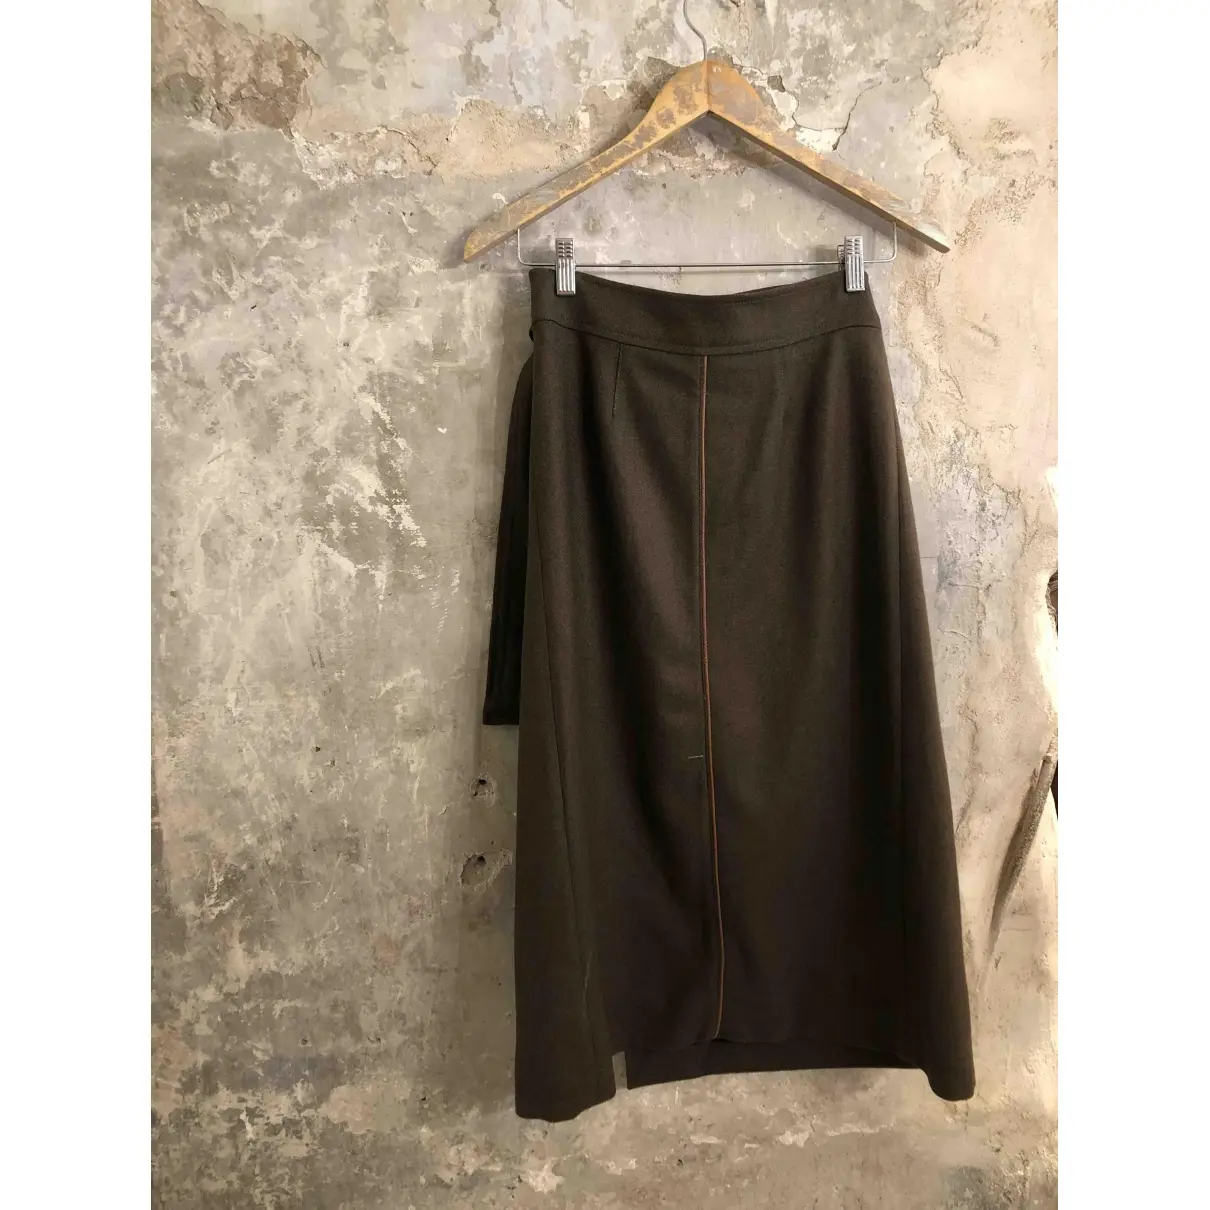 Attic And Barn Wool mid-length skirt for sale